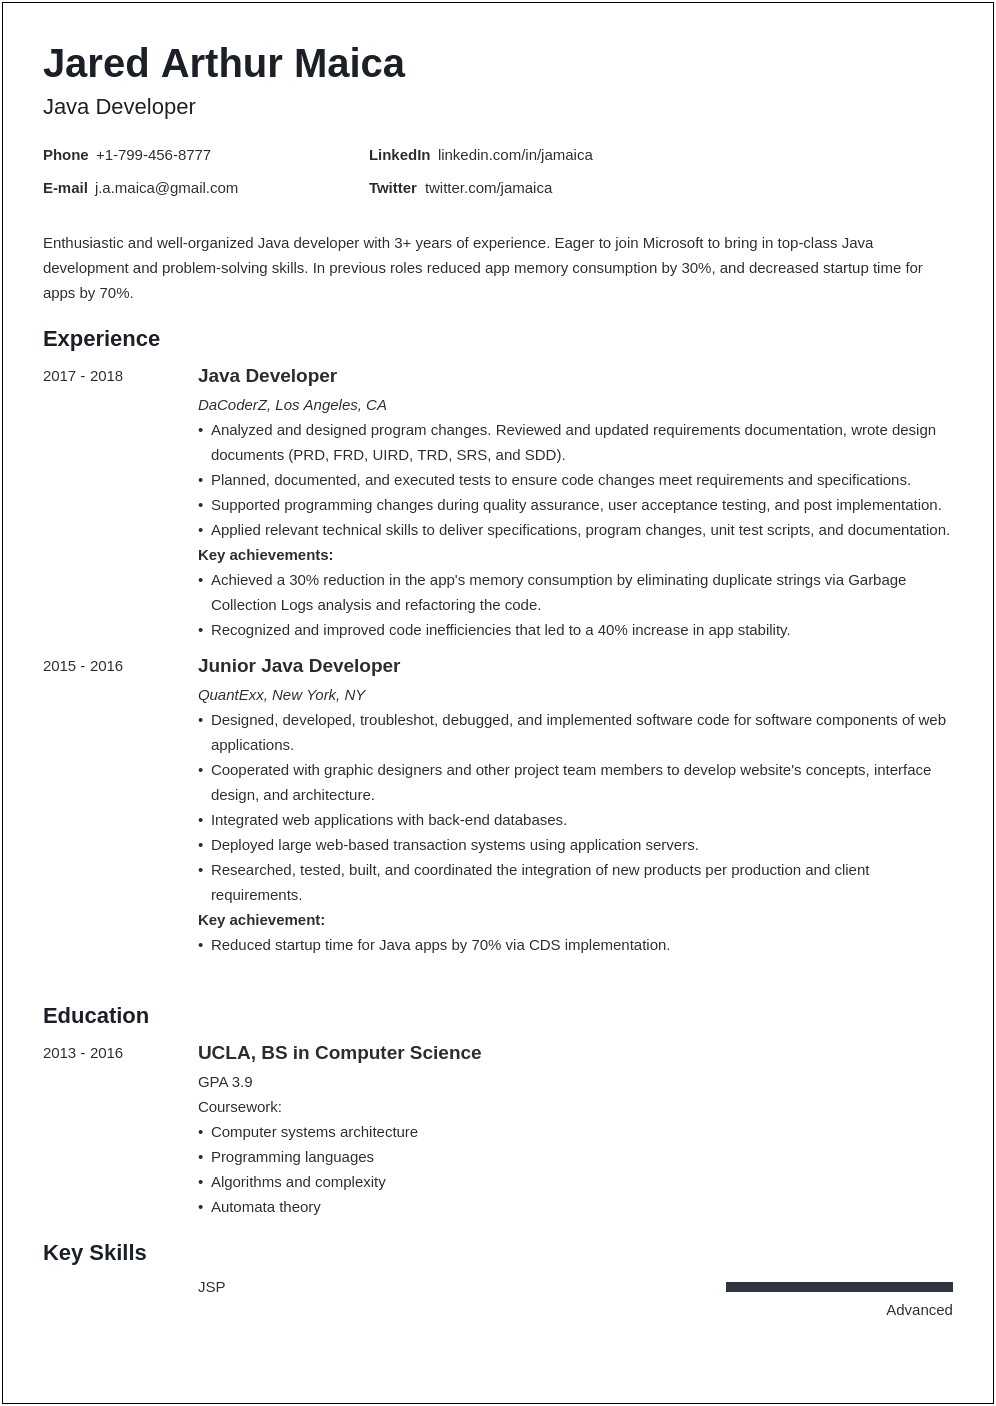 Clinical Programmer Resume 3 Year Experience